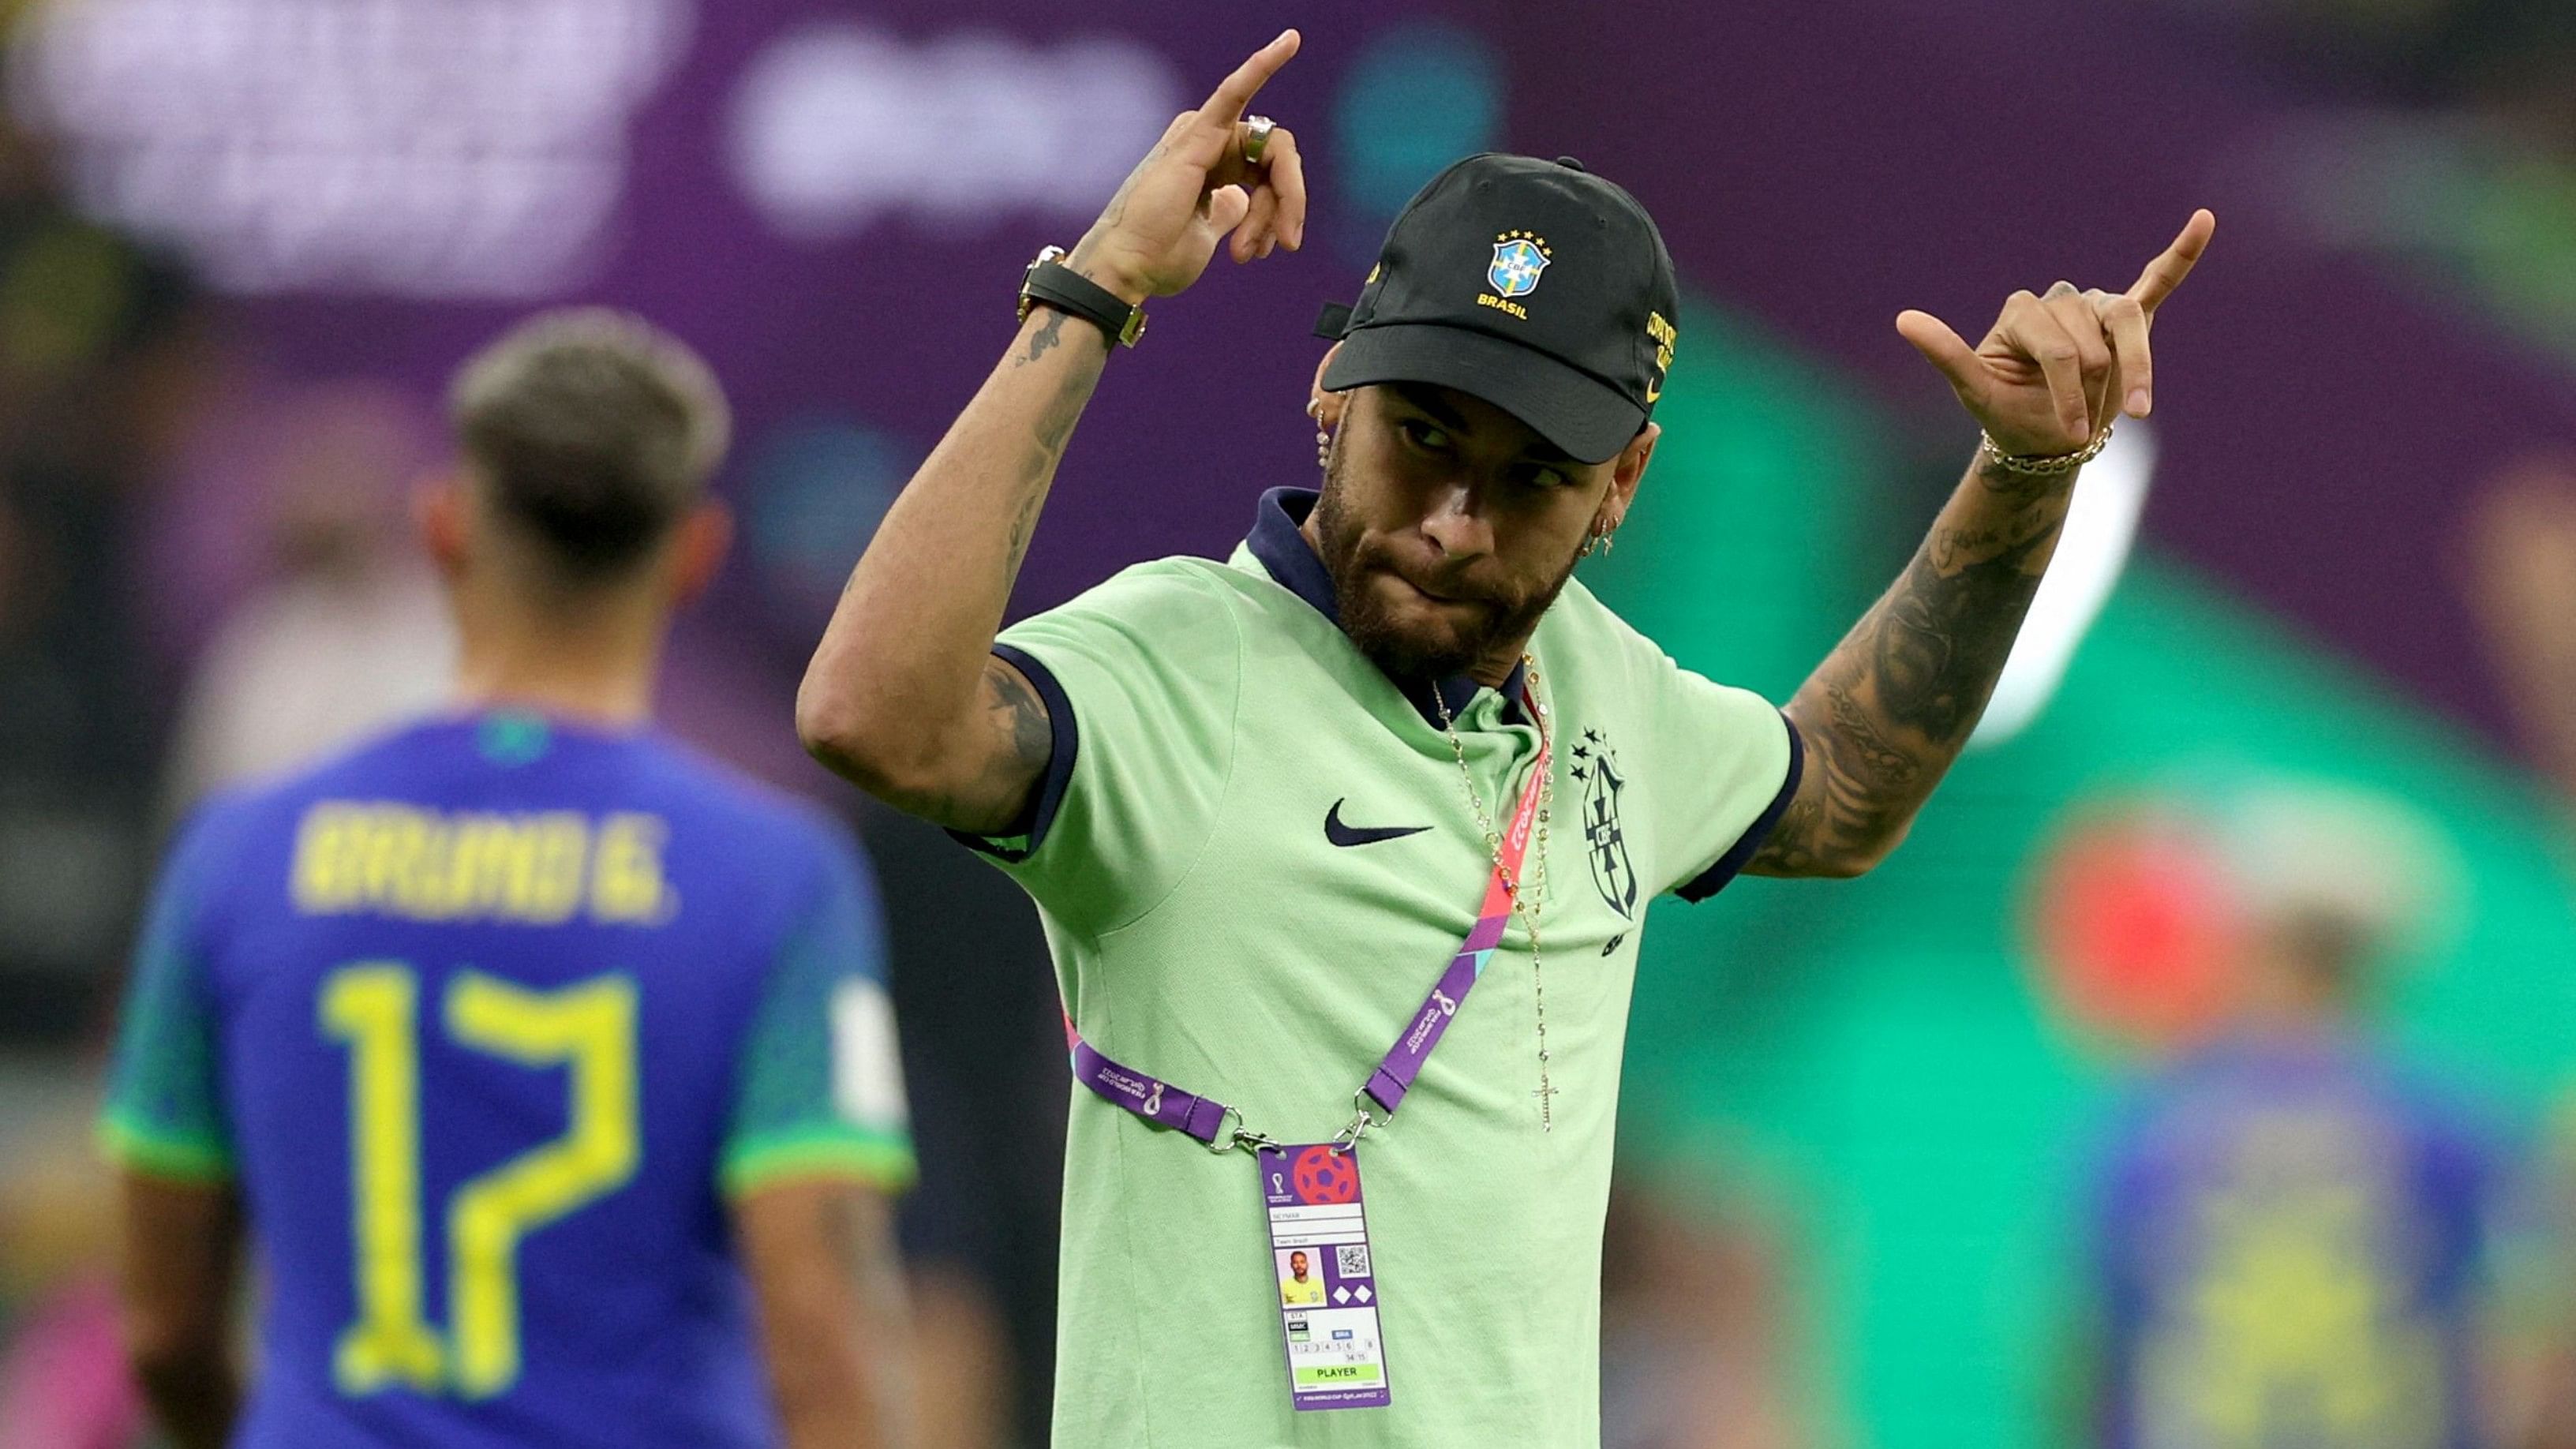 'Regarding Neymar and Alex Sandro, we think we have time on our hands and there is a possibility', Brazil's team doctor said. Credit: AFP Photo